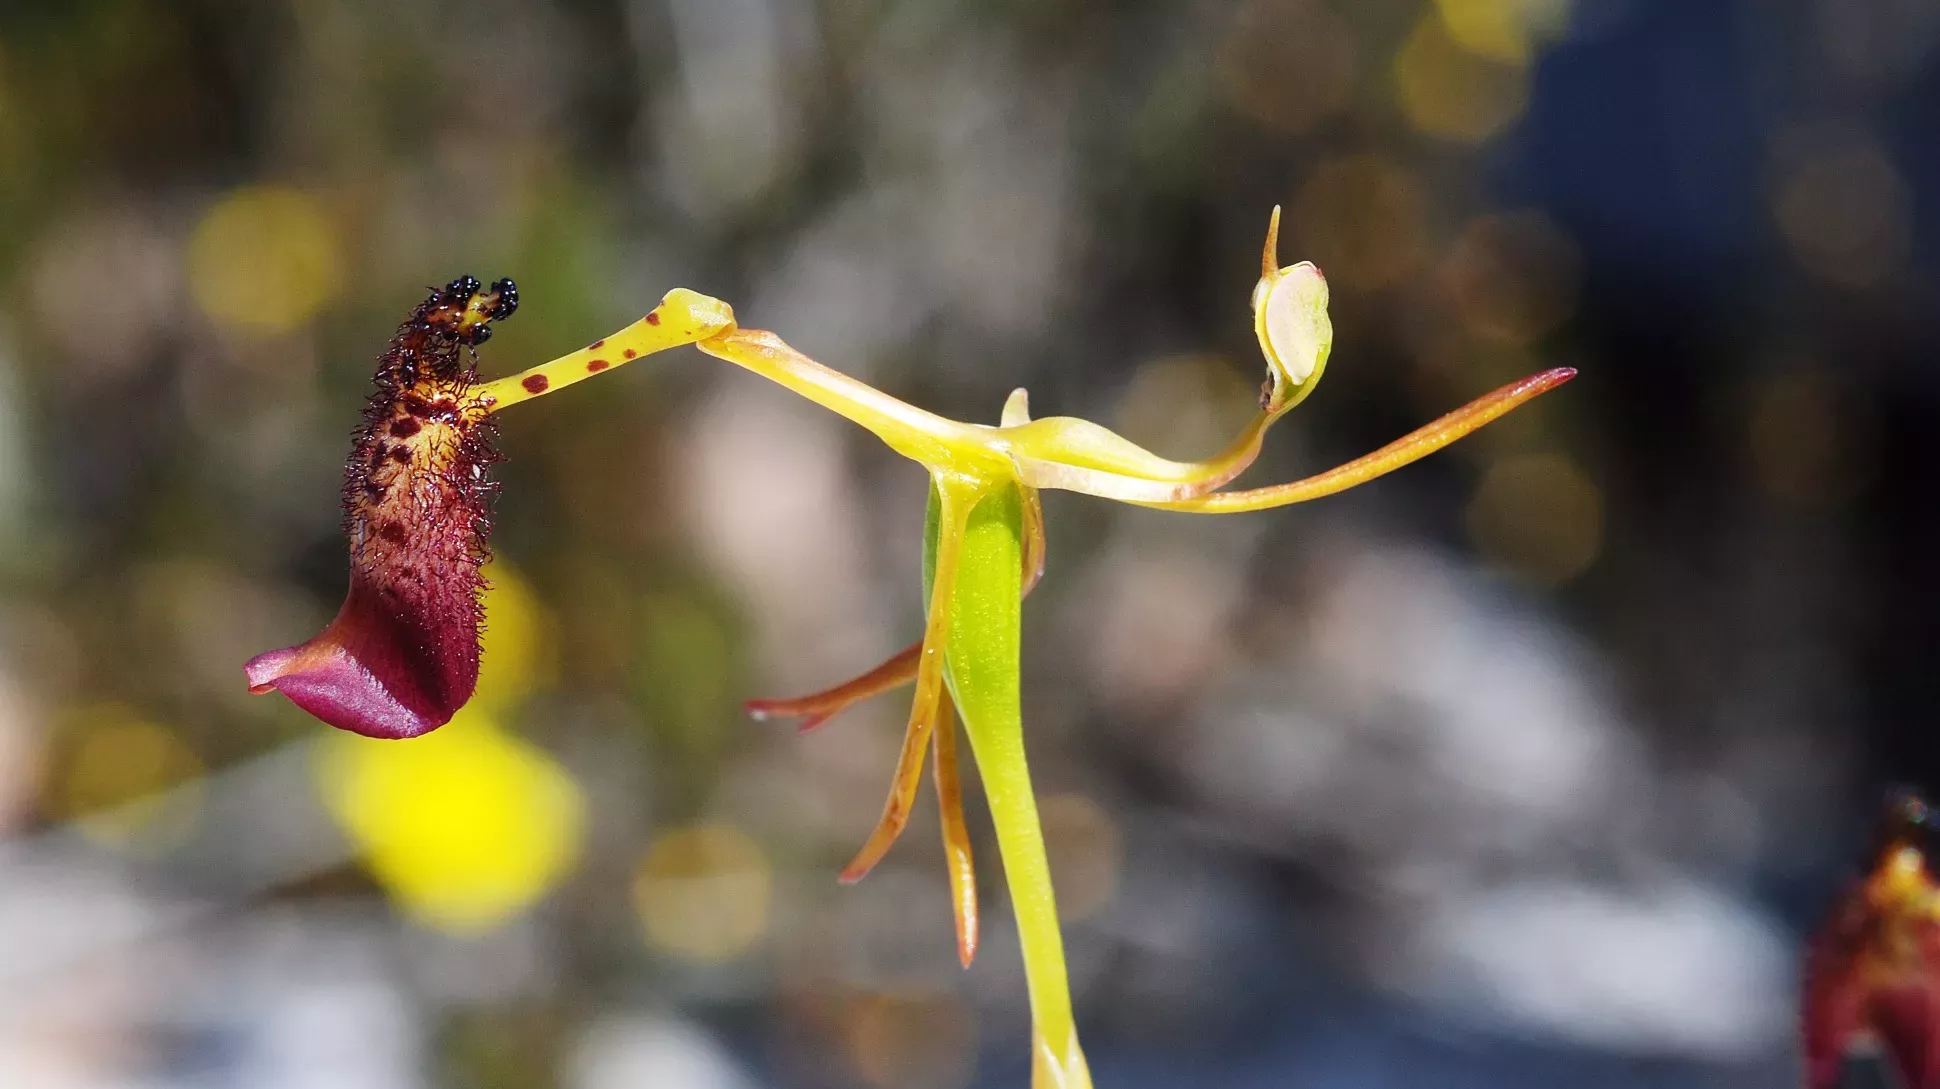 A hammer orchid with a swollen red and black petal at one side of its flower